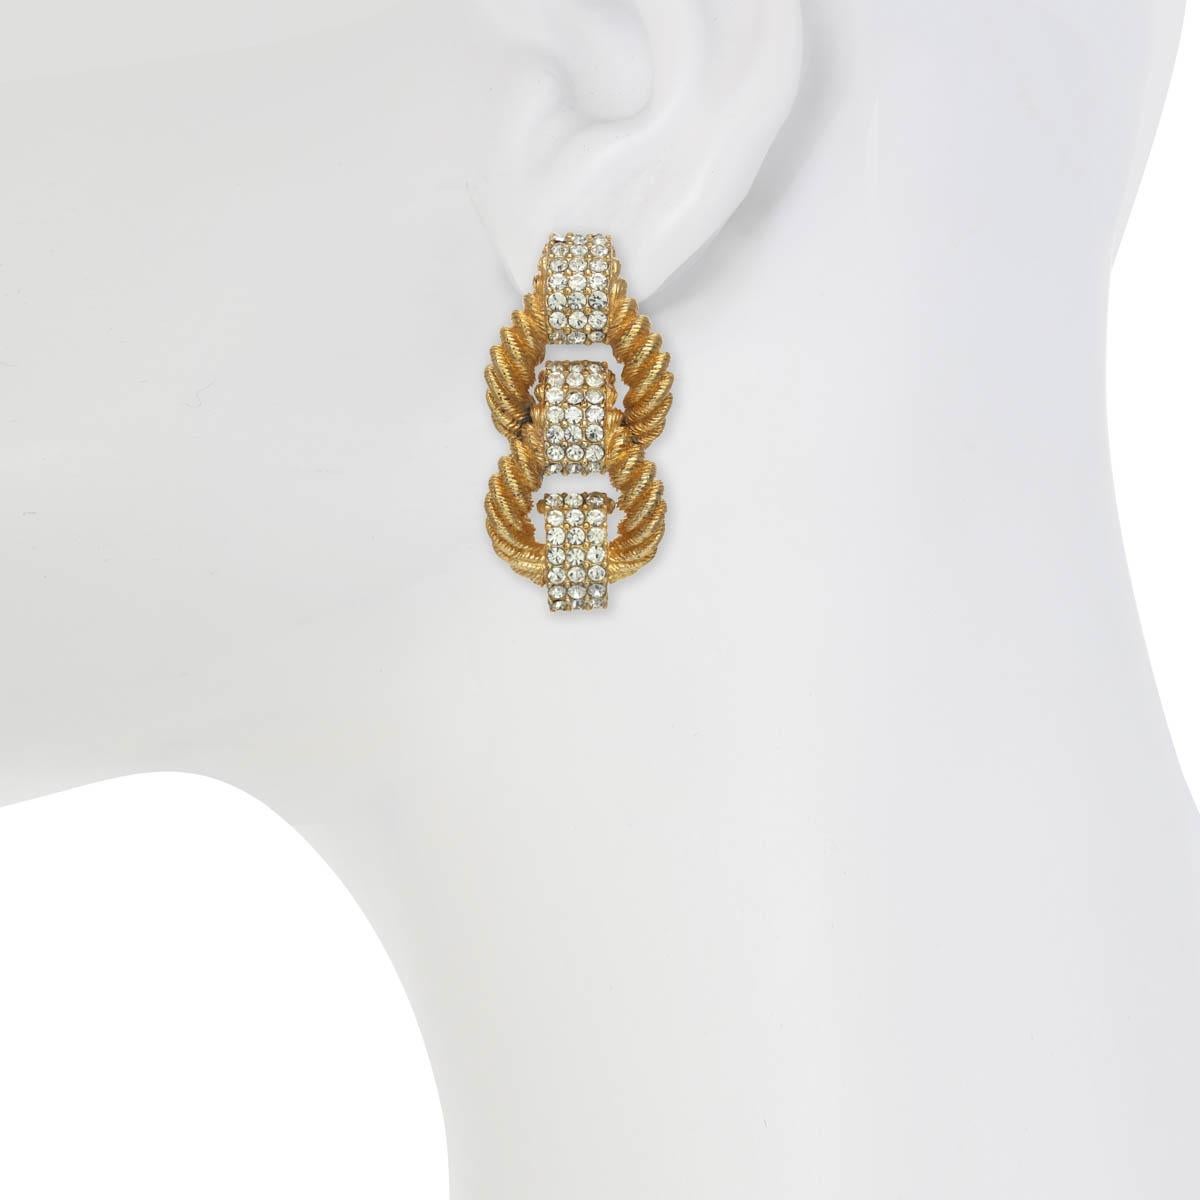 With gorgeous crystal rhinestone accents, these earrings are a timeless staple for every woman's wardrobe. Forever chic, these statement earrings will last the test of time. 

PLEASE NOTE: The pieces available are not vintage and are not